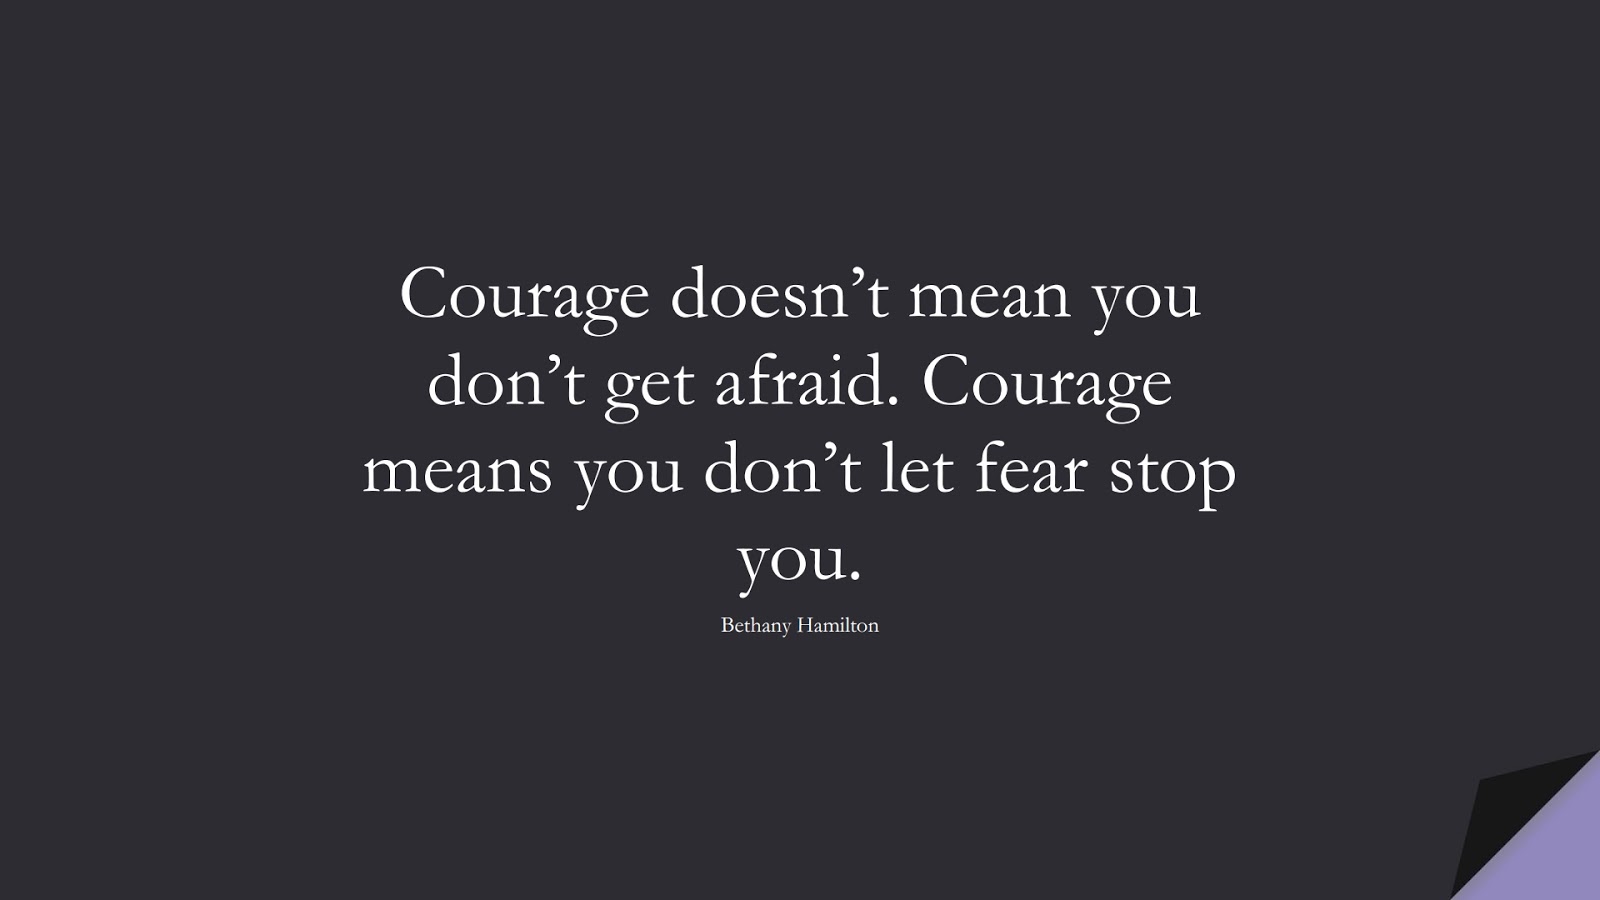 Courage doesn’t mean you don’t get afraid. Courage means you don’t let fear stop you. (Bethany Hamilton);  #FearQuotes